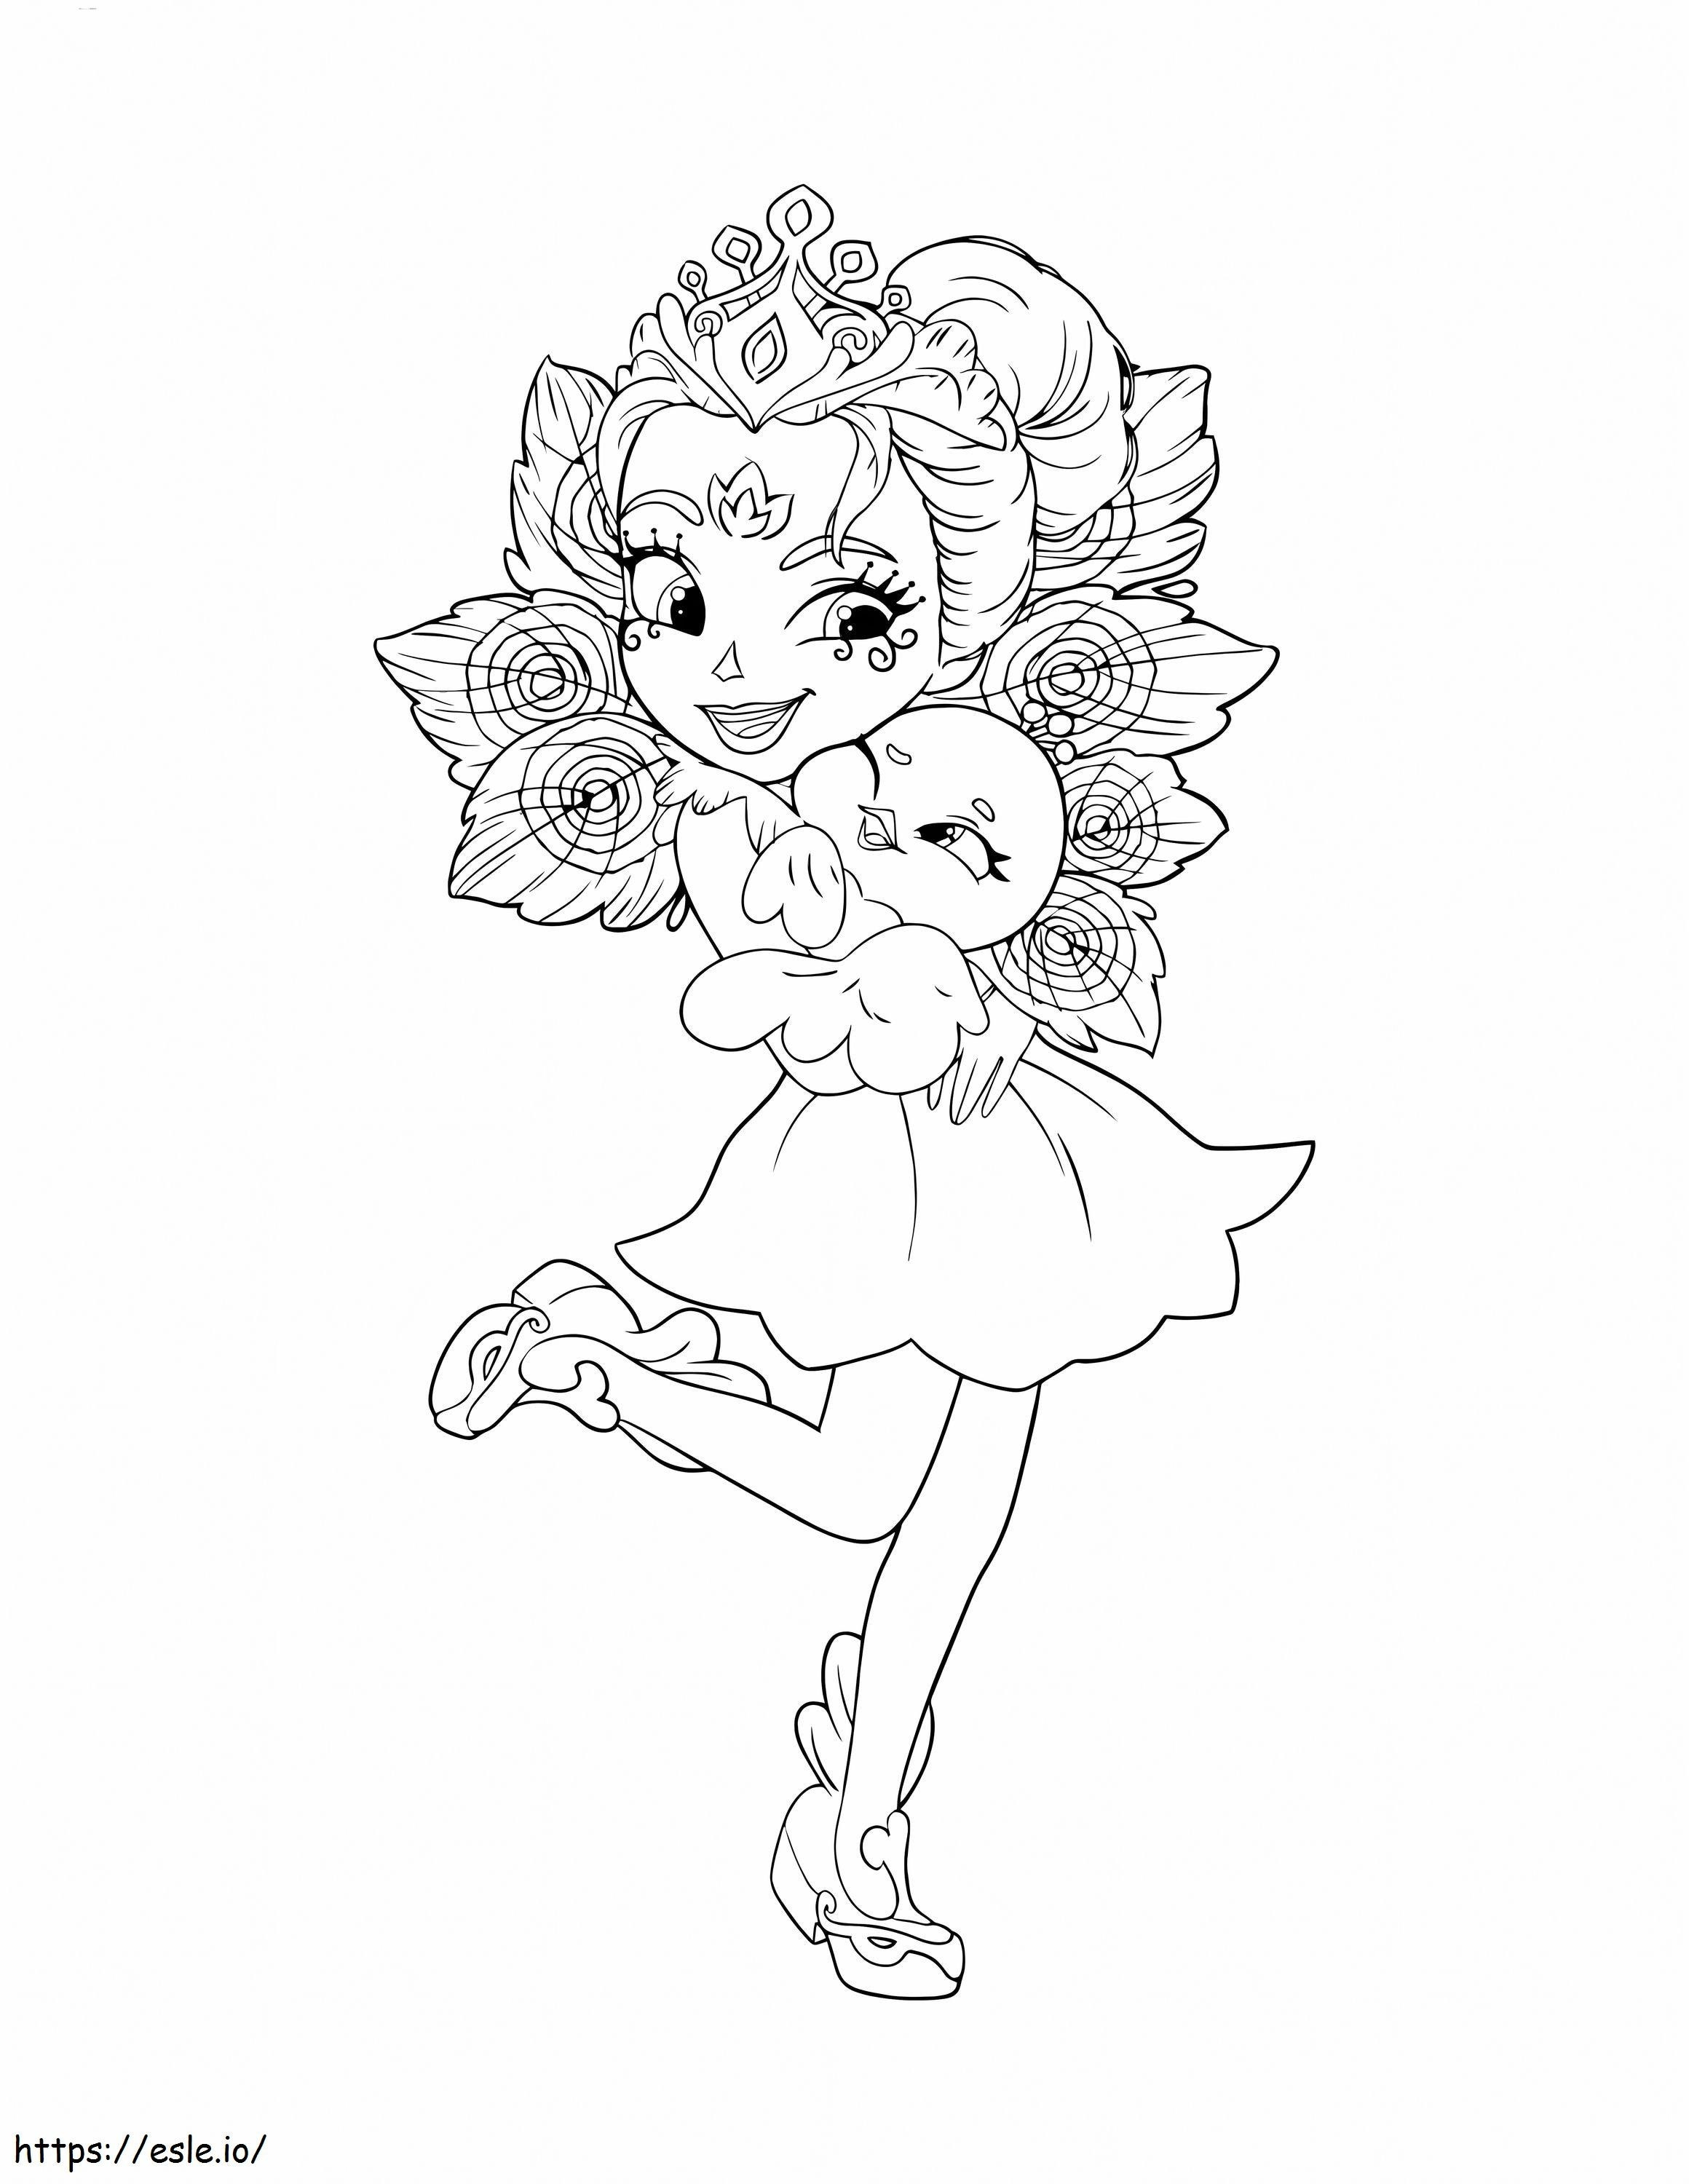 Princess Holding Peacock coloring page